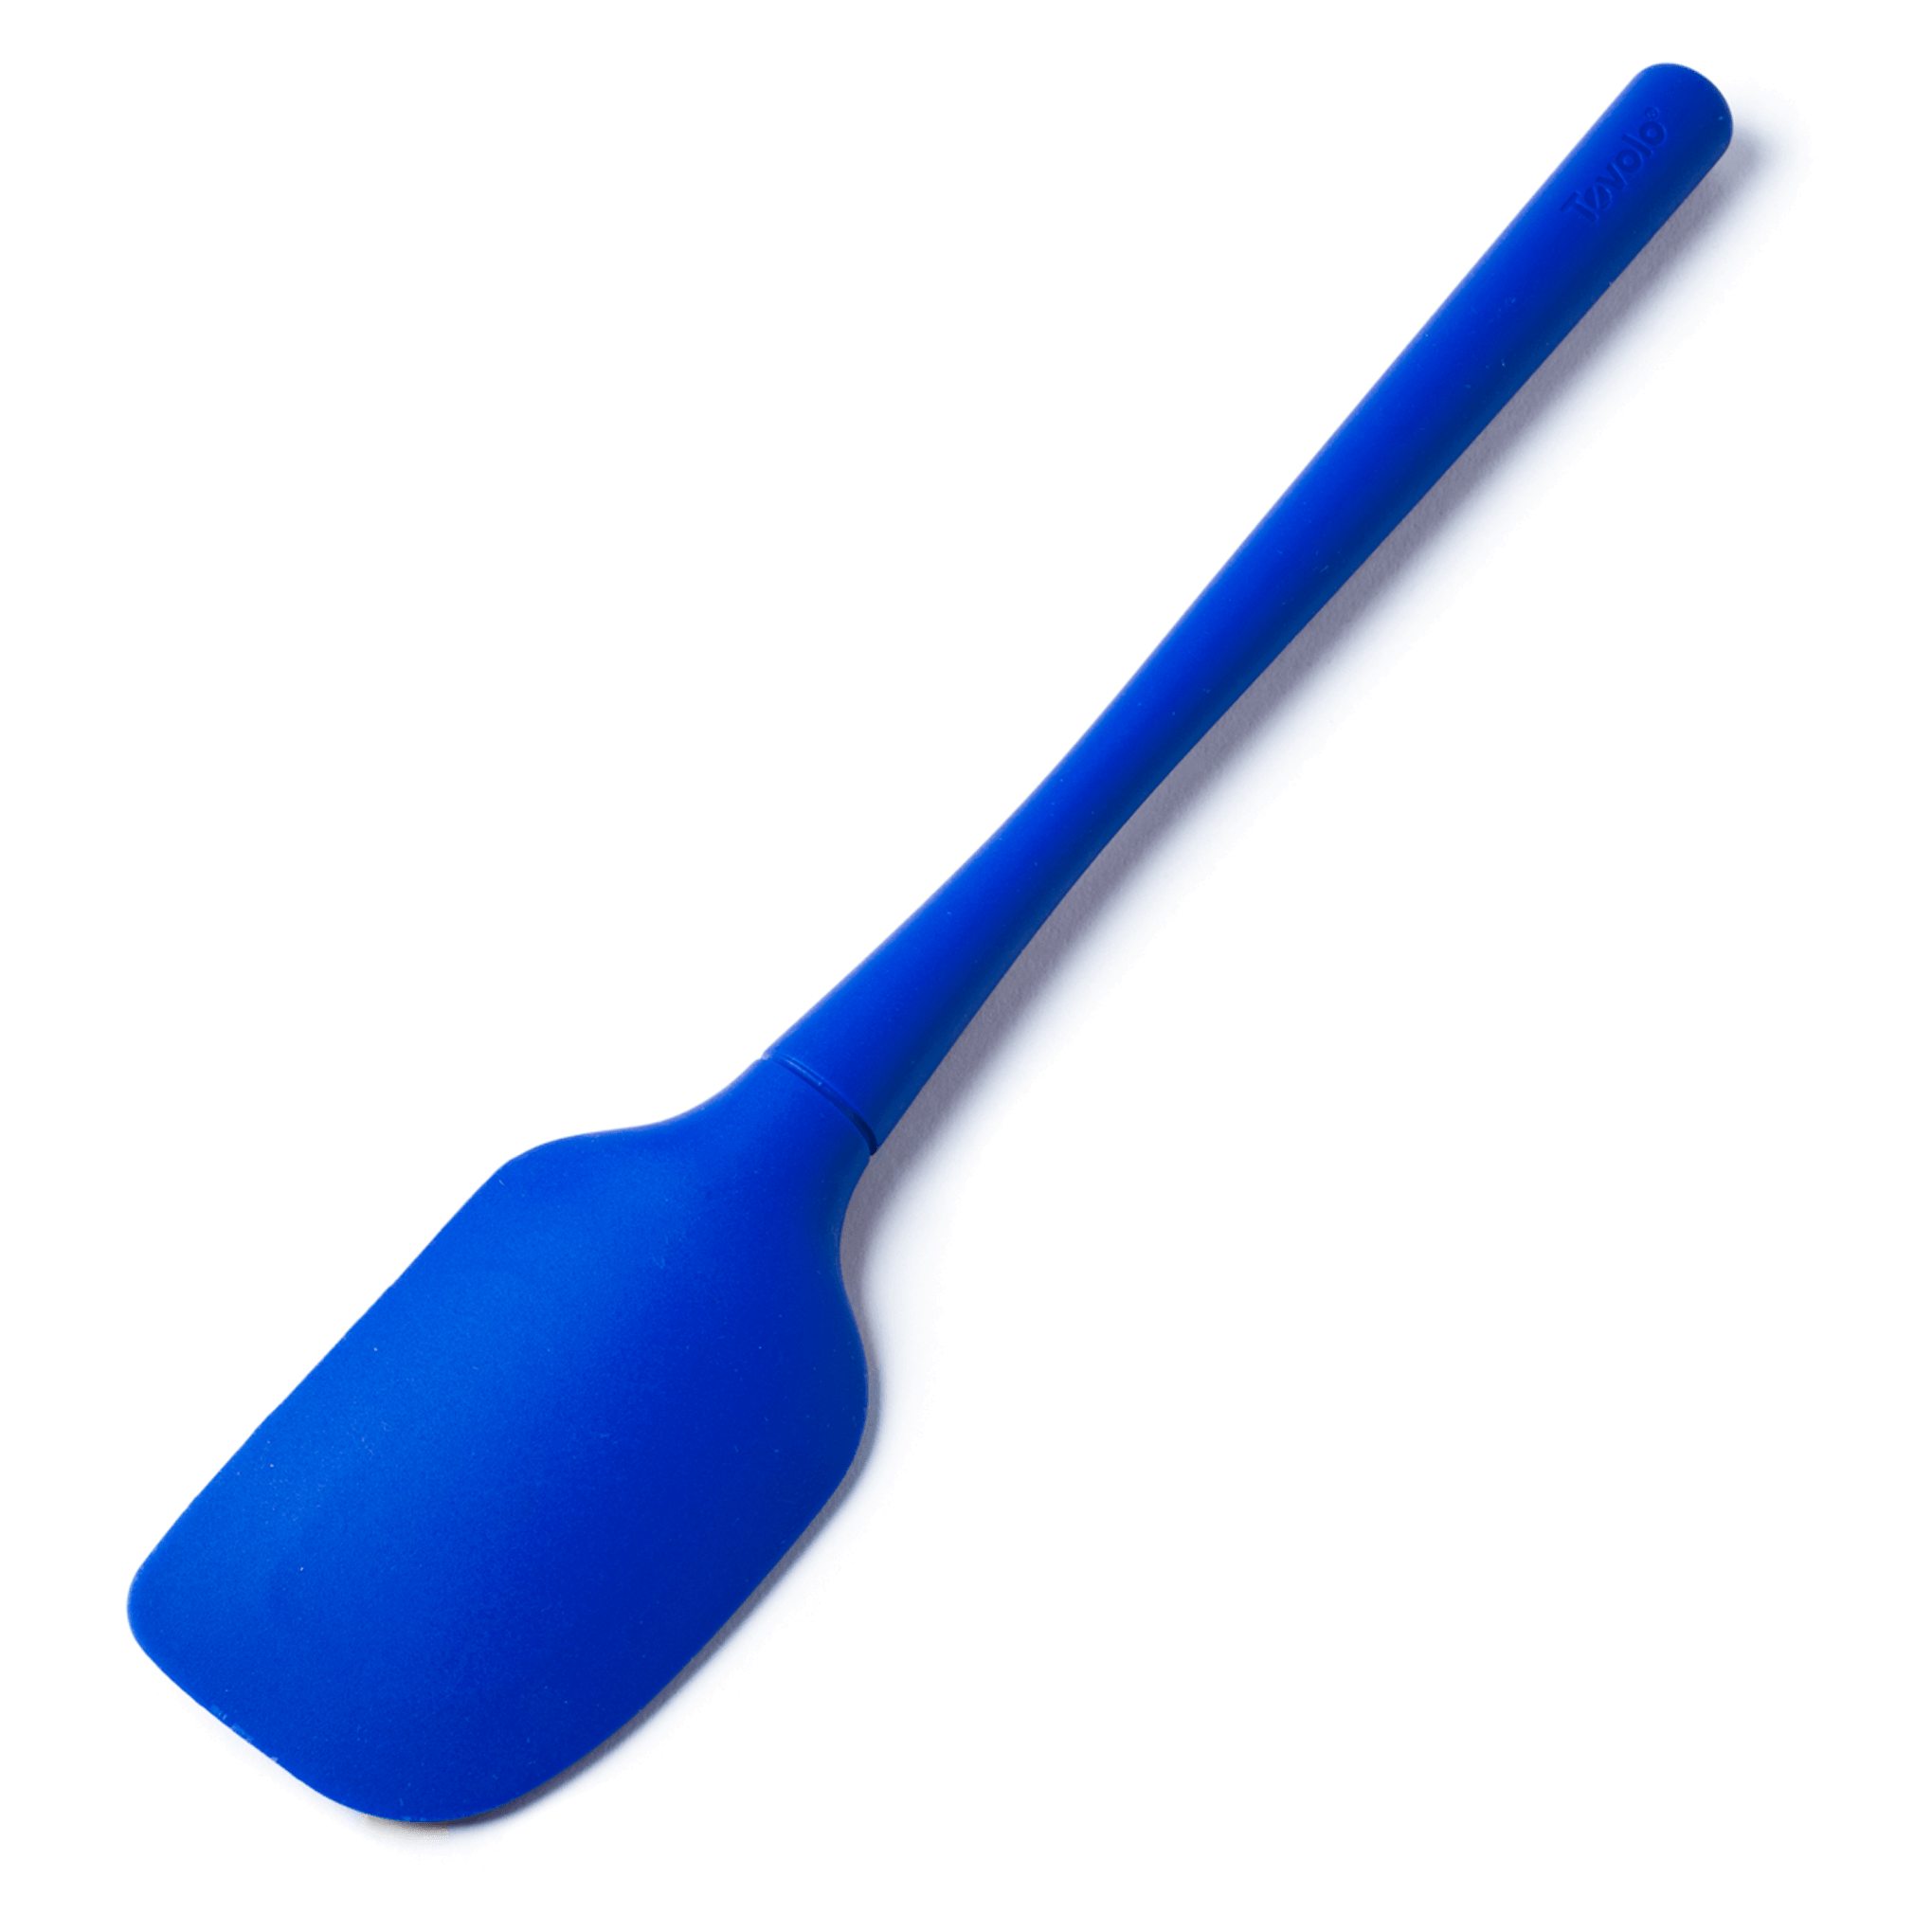 https://res.cloudinary.com/hksqkdlah/image/upload/33793_sil-siliconespatulas-tovoloflexcore-3.png